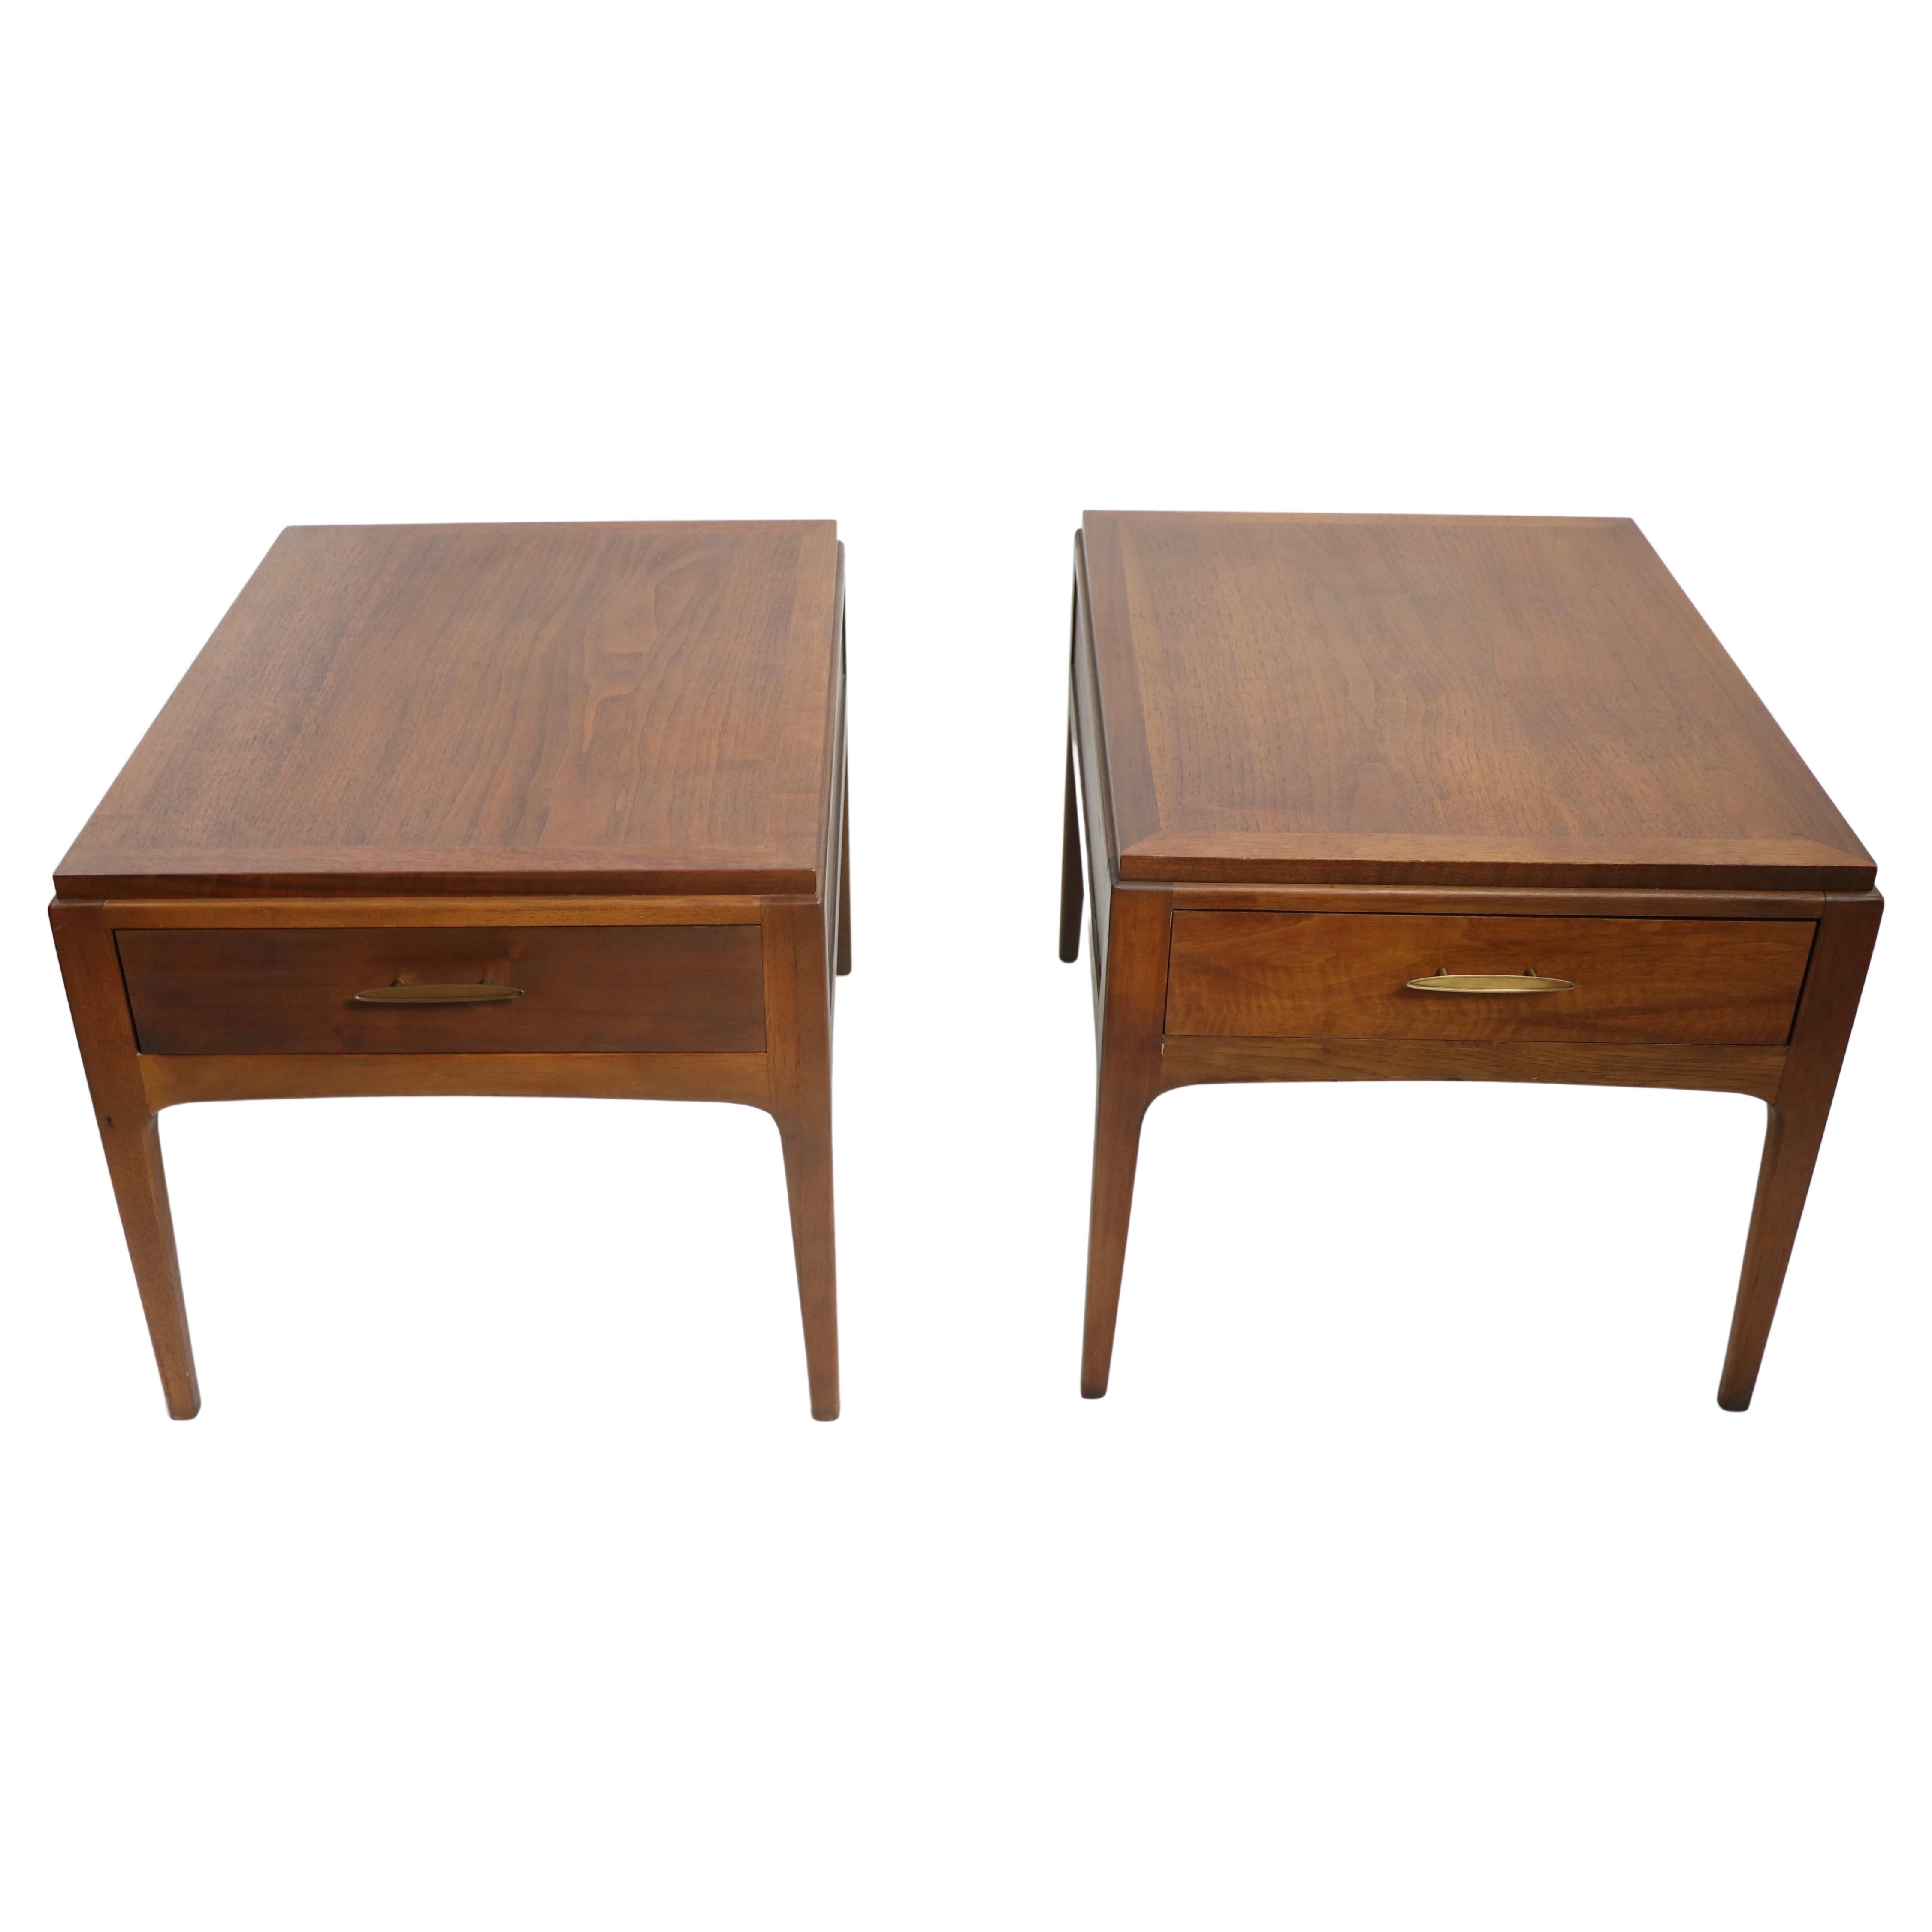 Pr. Mid-Century One Drawer End Tables, Night Stands by Lane